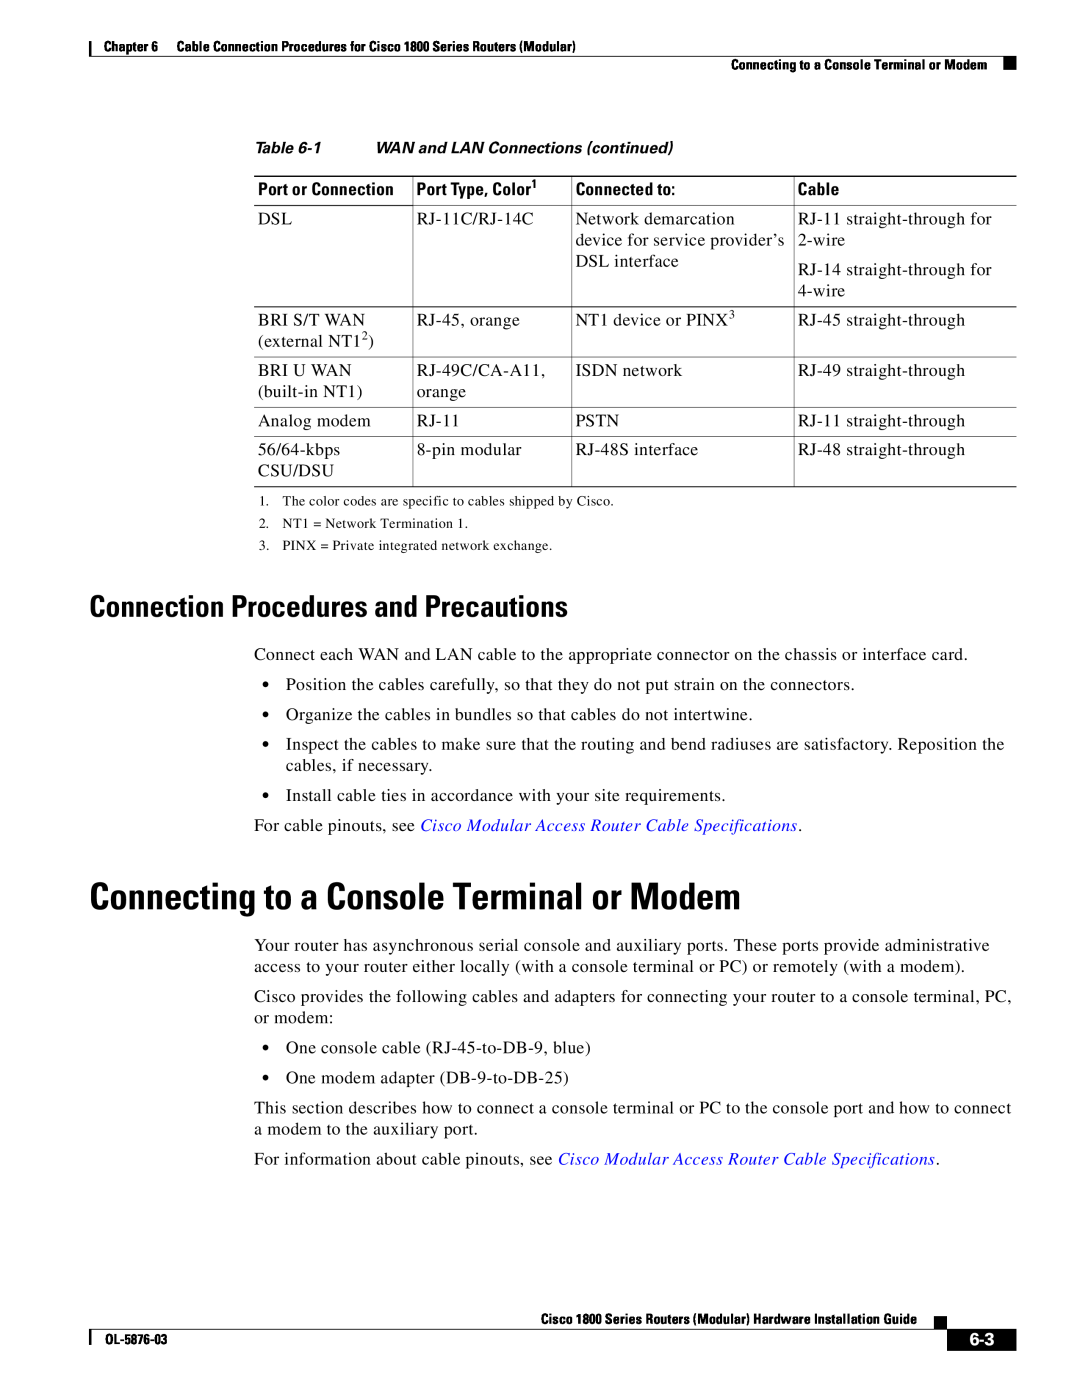 Cisco Systems CISCO1841-HSEC/K9-RF manual Connecting to a Console Terminal or Modem, Connection Procedures and Precautions 